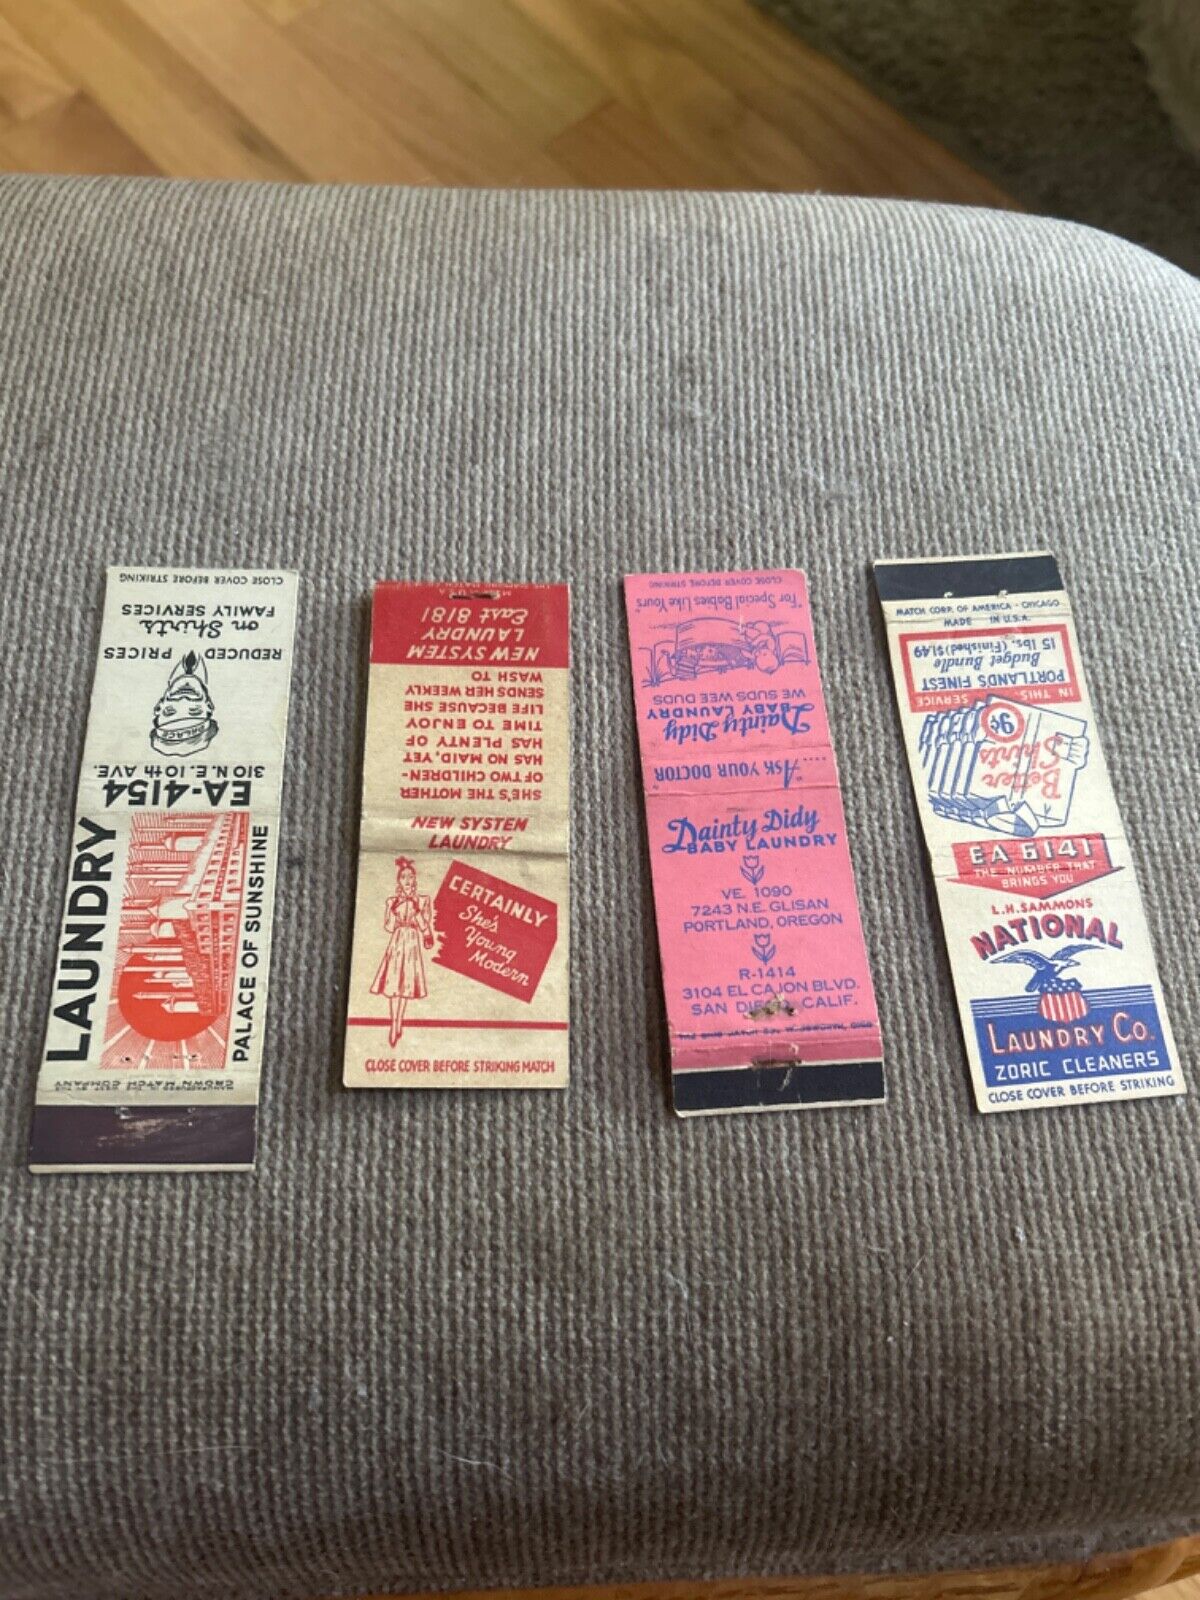 4 pcs lotLAUNDRY & DRY CLEANING VINTAGE MATCHBOOK COVER